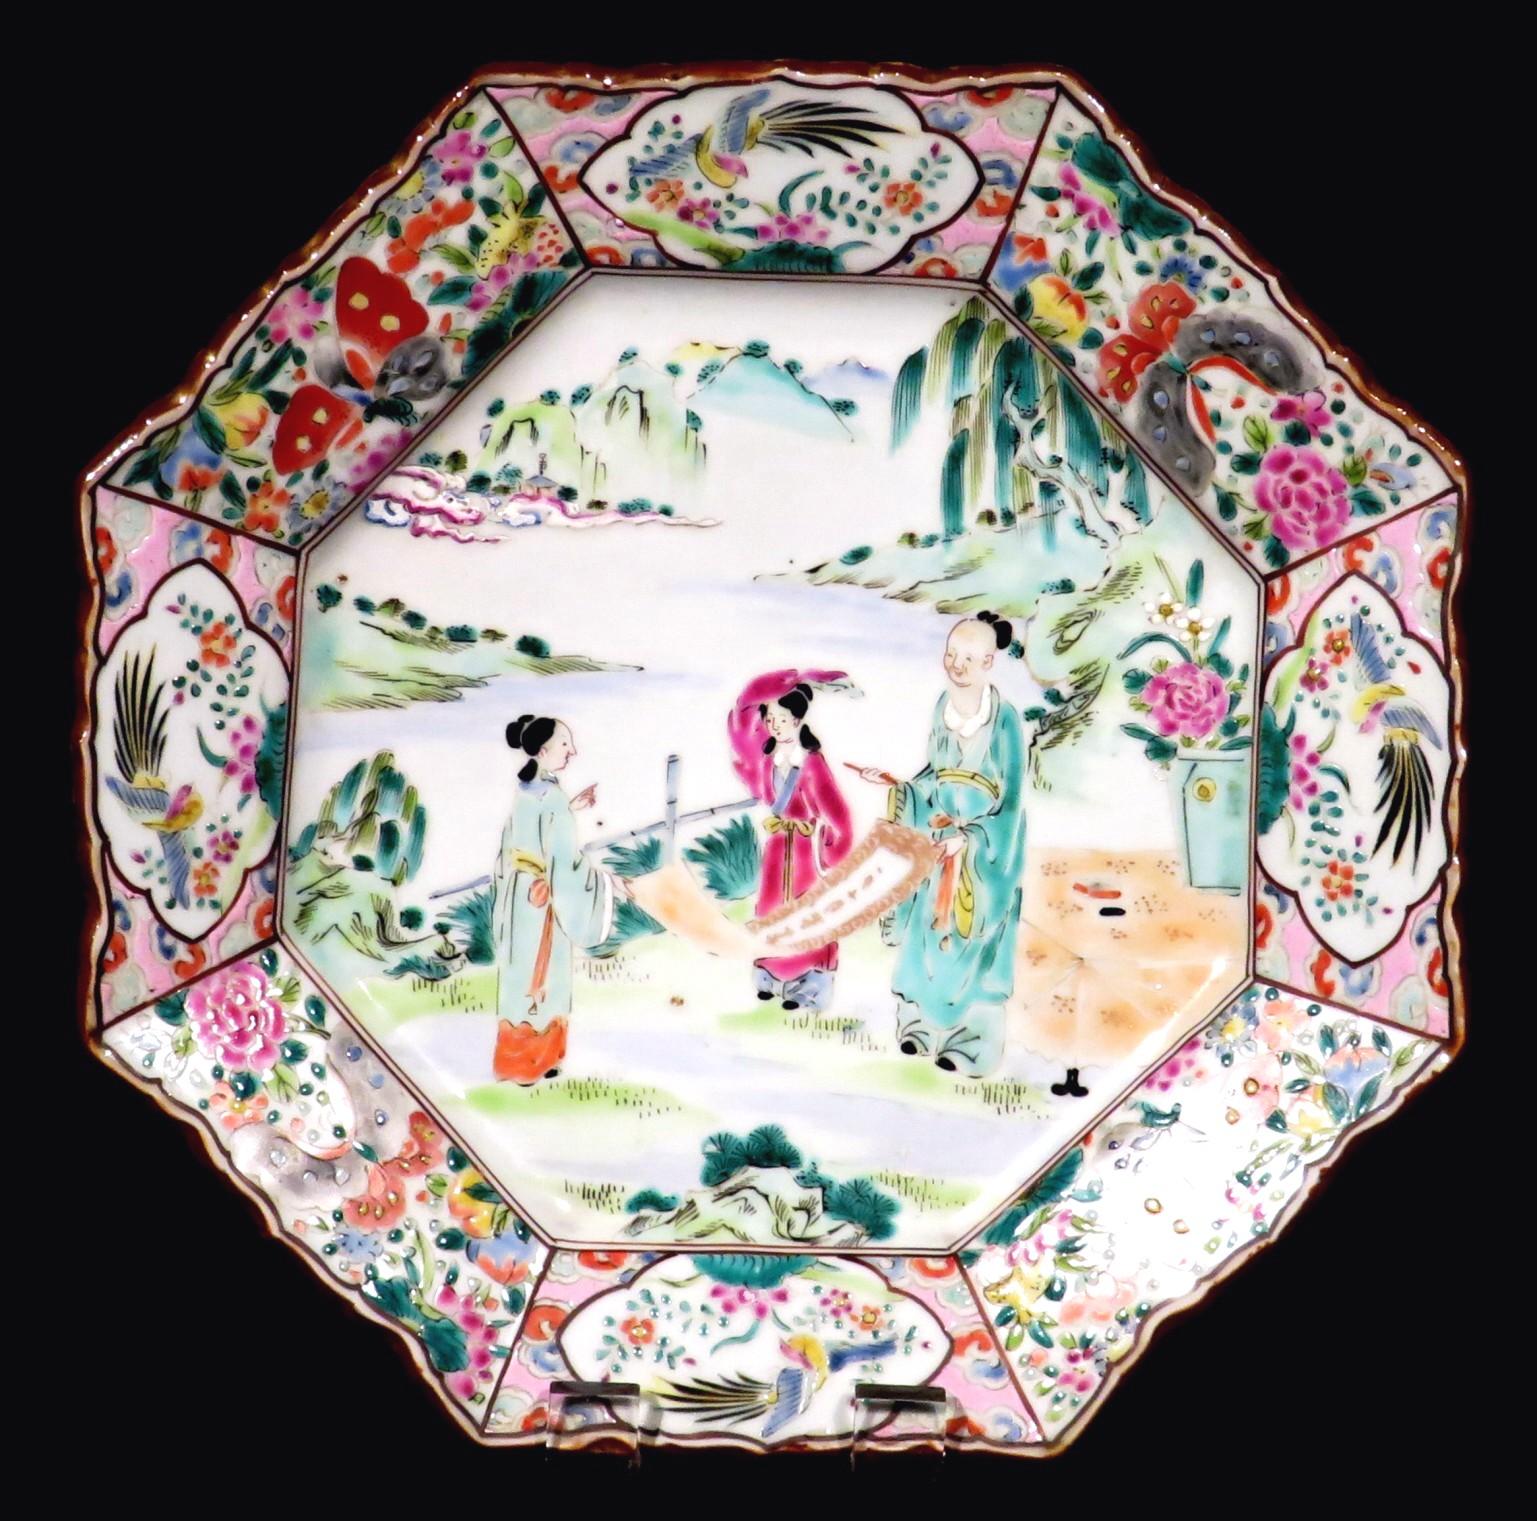 These fine cabinet plates date from the Meiji Period (1868-1912), showing richly decorated hand painted enamelled bodies. Their central fields illustrating finely executed vignettes depicting figures in garden landscapes within a panelled border of